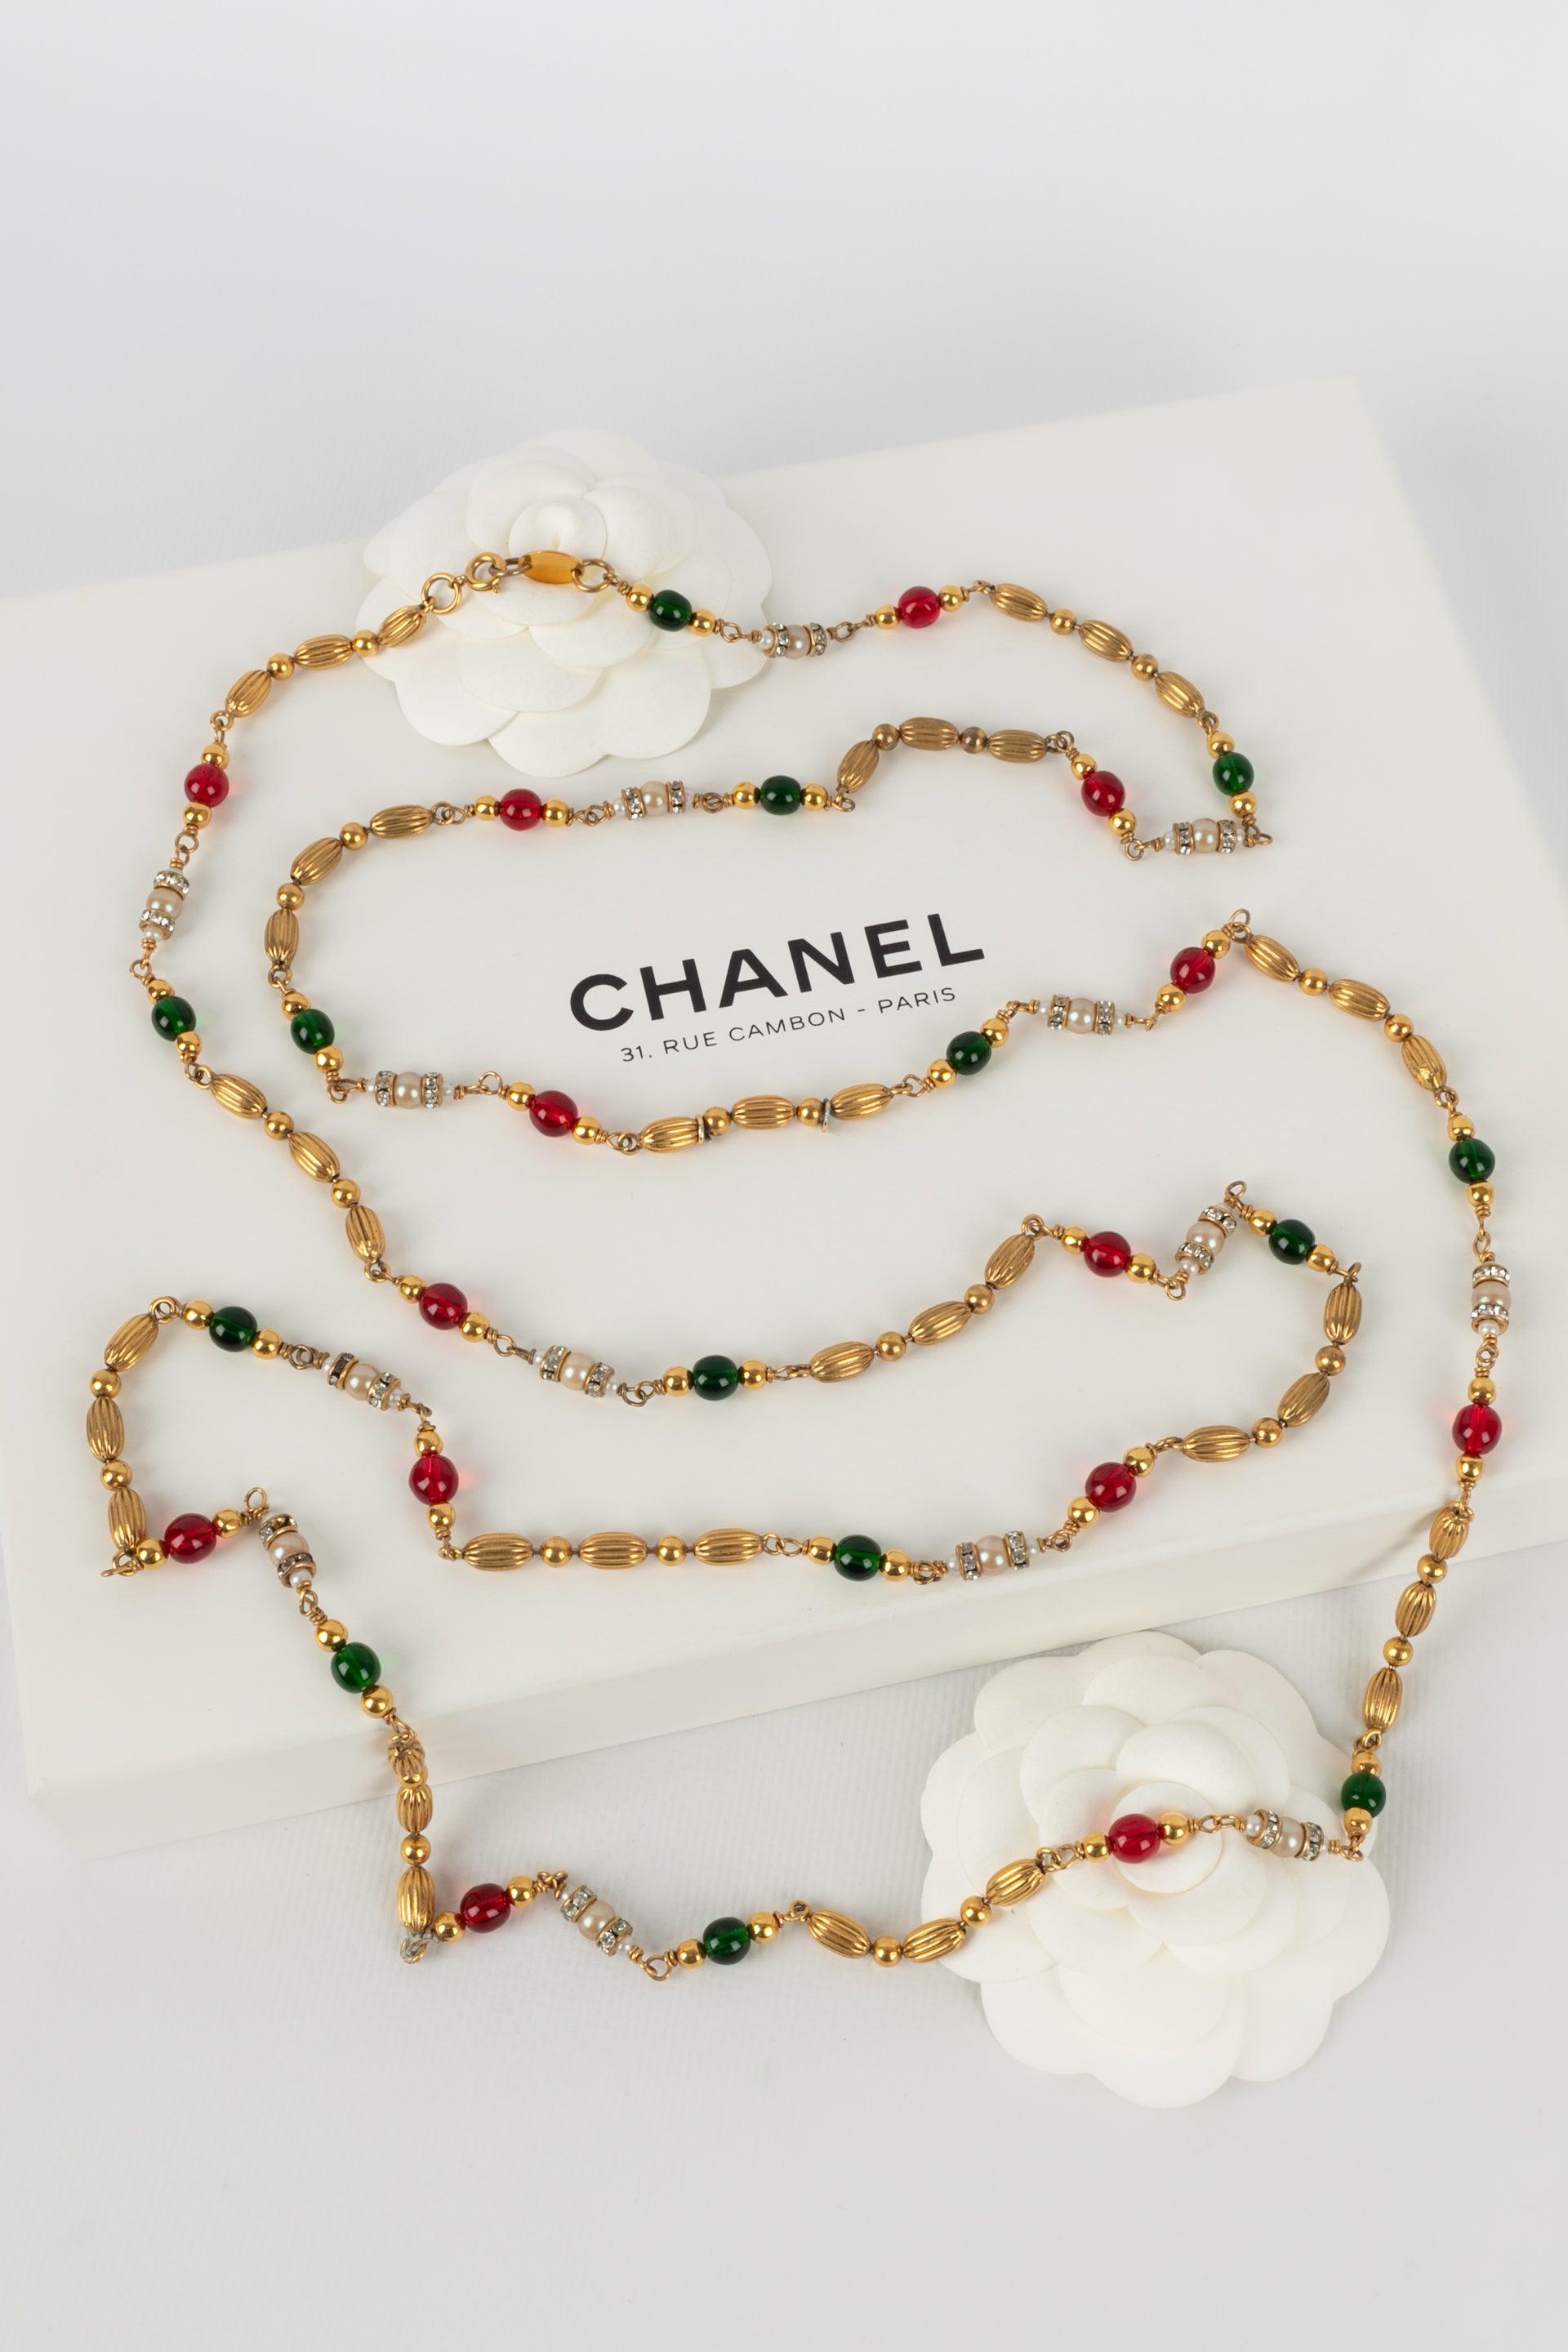 Chanel Golden Metal Sautoir with Metallic & Glass Pearls, Rhinestones Necklace For Sale 4